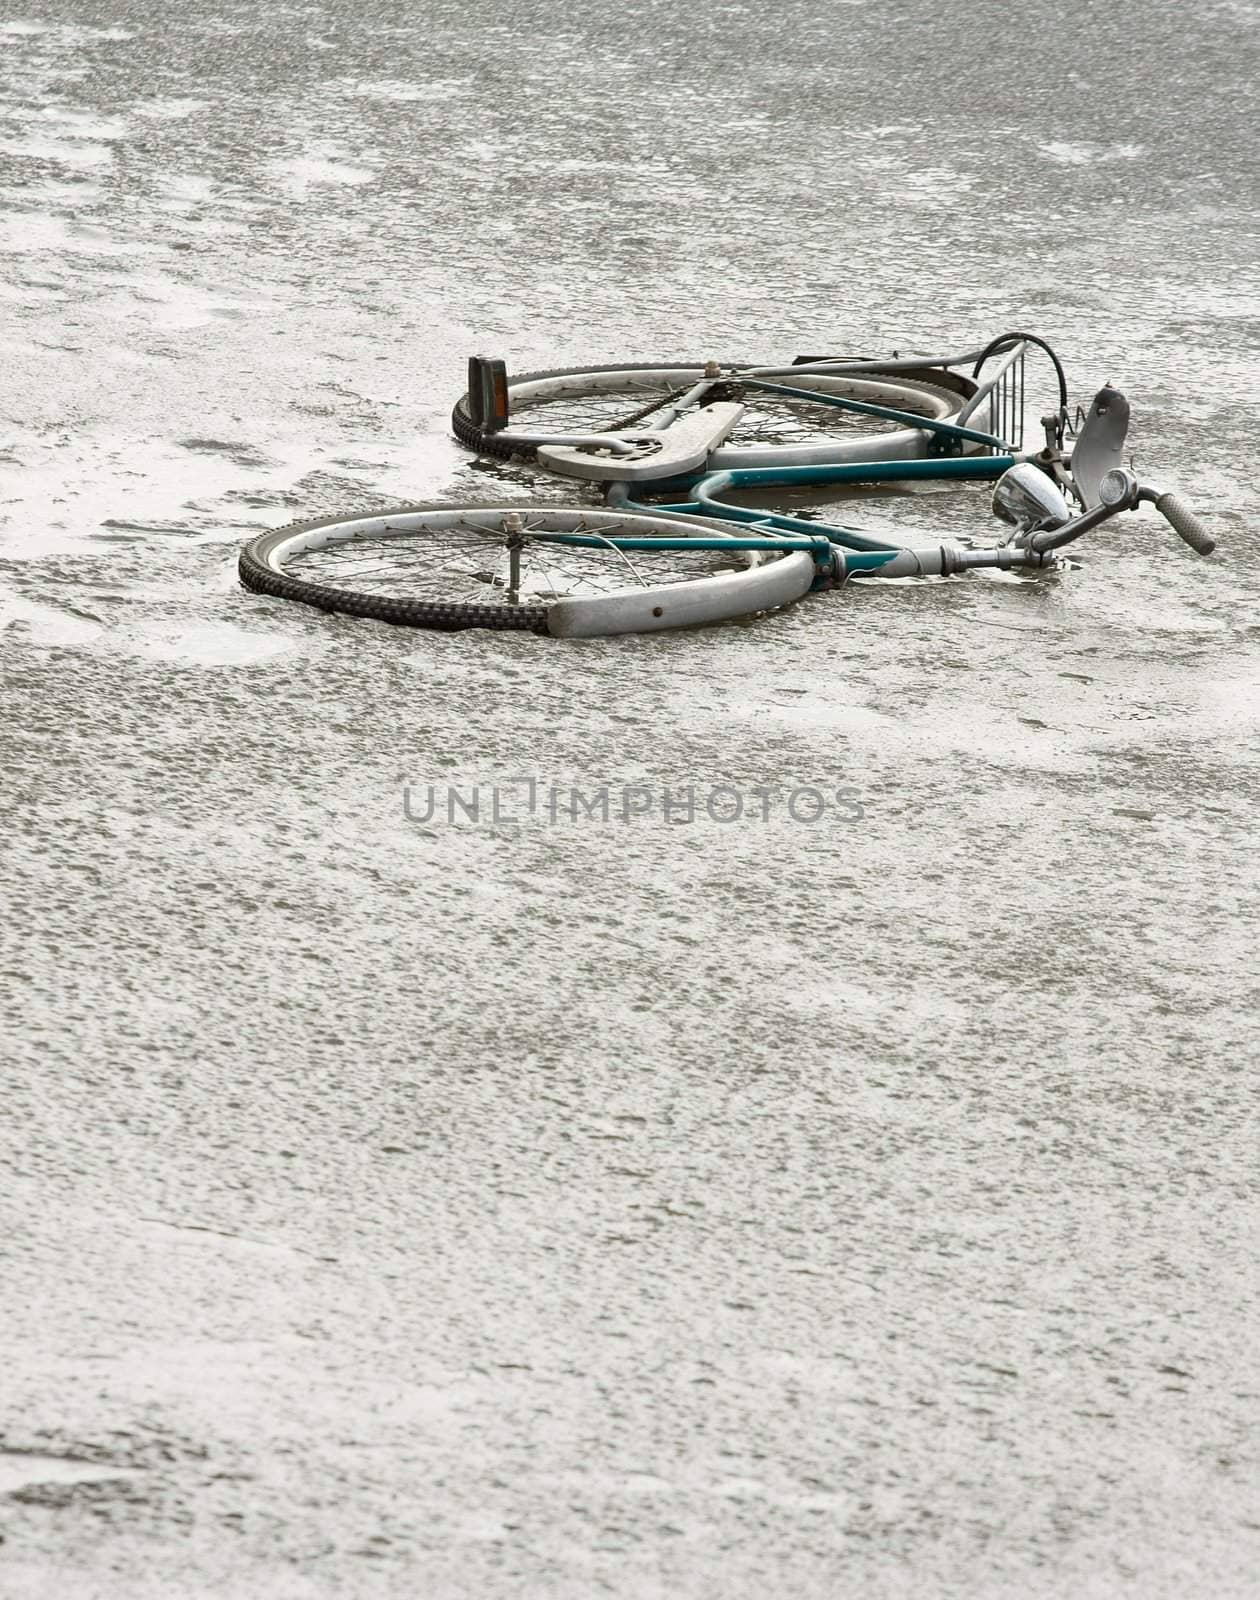 Abandoned, broken bicycle on a frozen lake